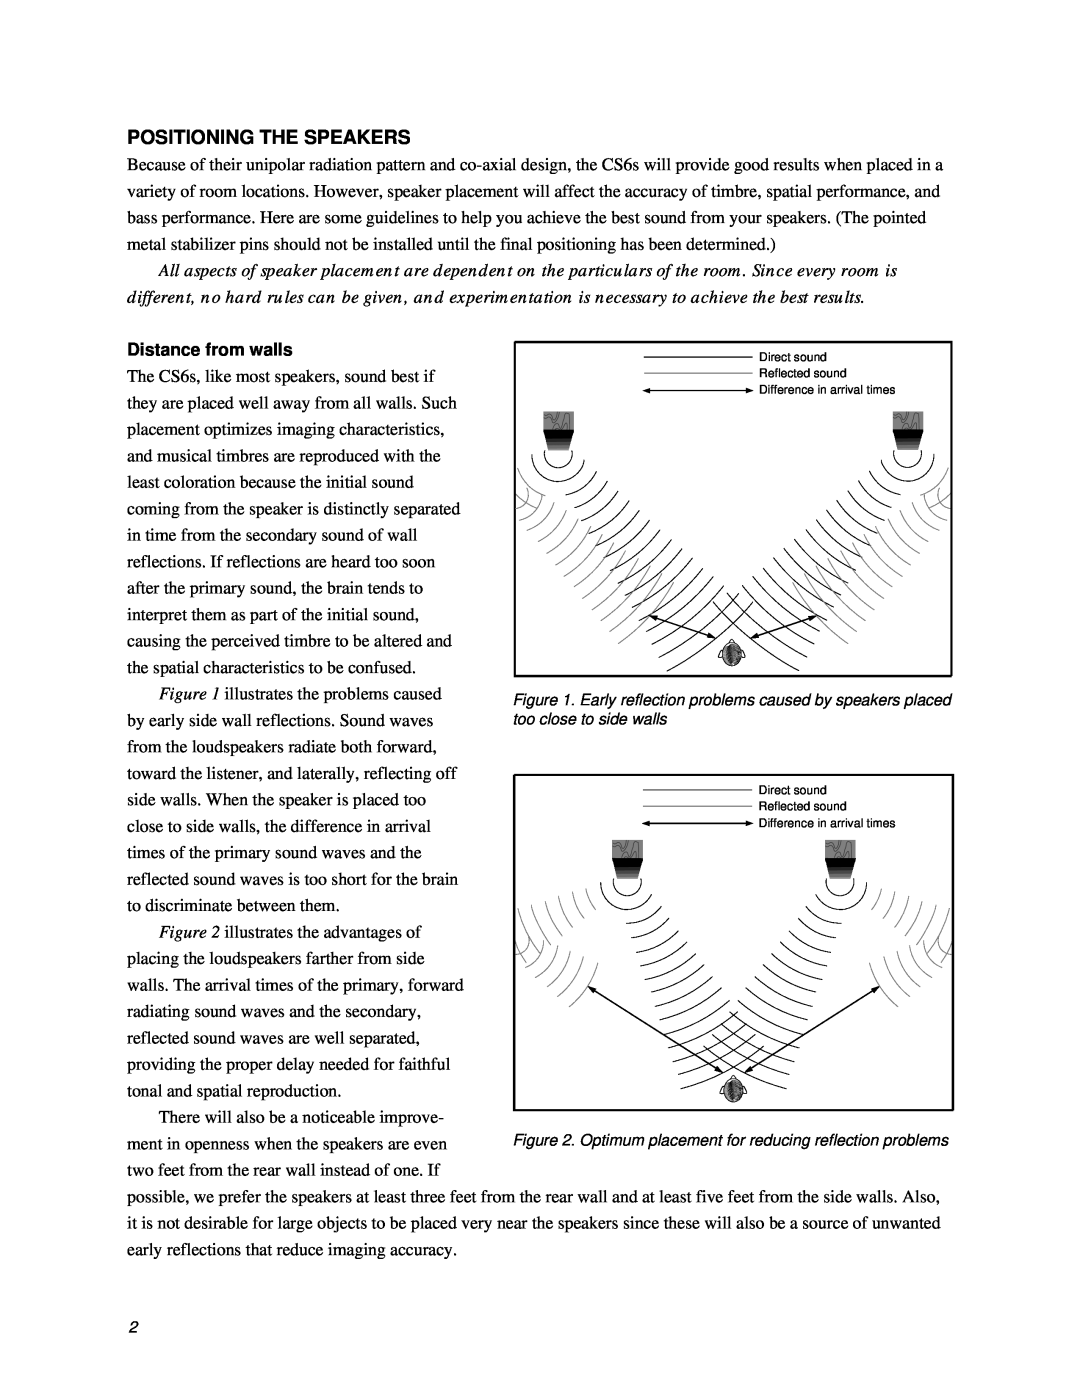 Thiel Audio Products CS6 manual Positioning The Speakers, Distance from walls 